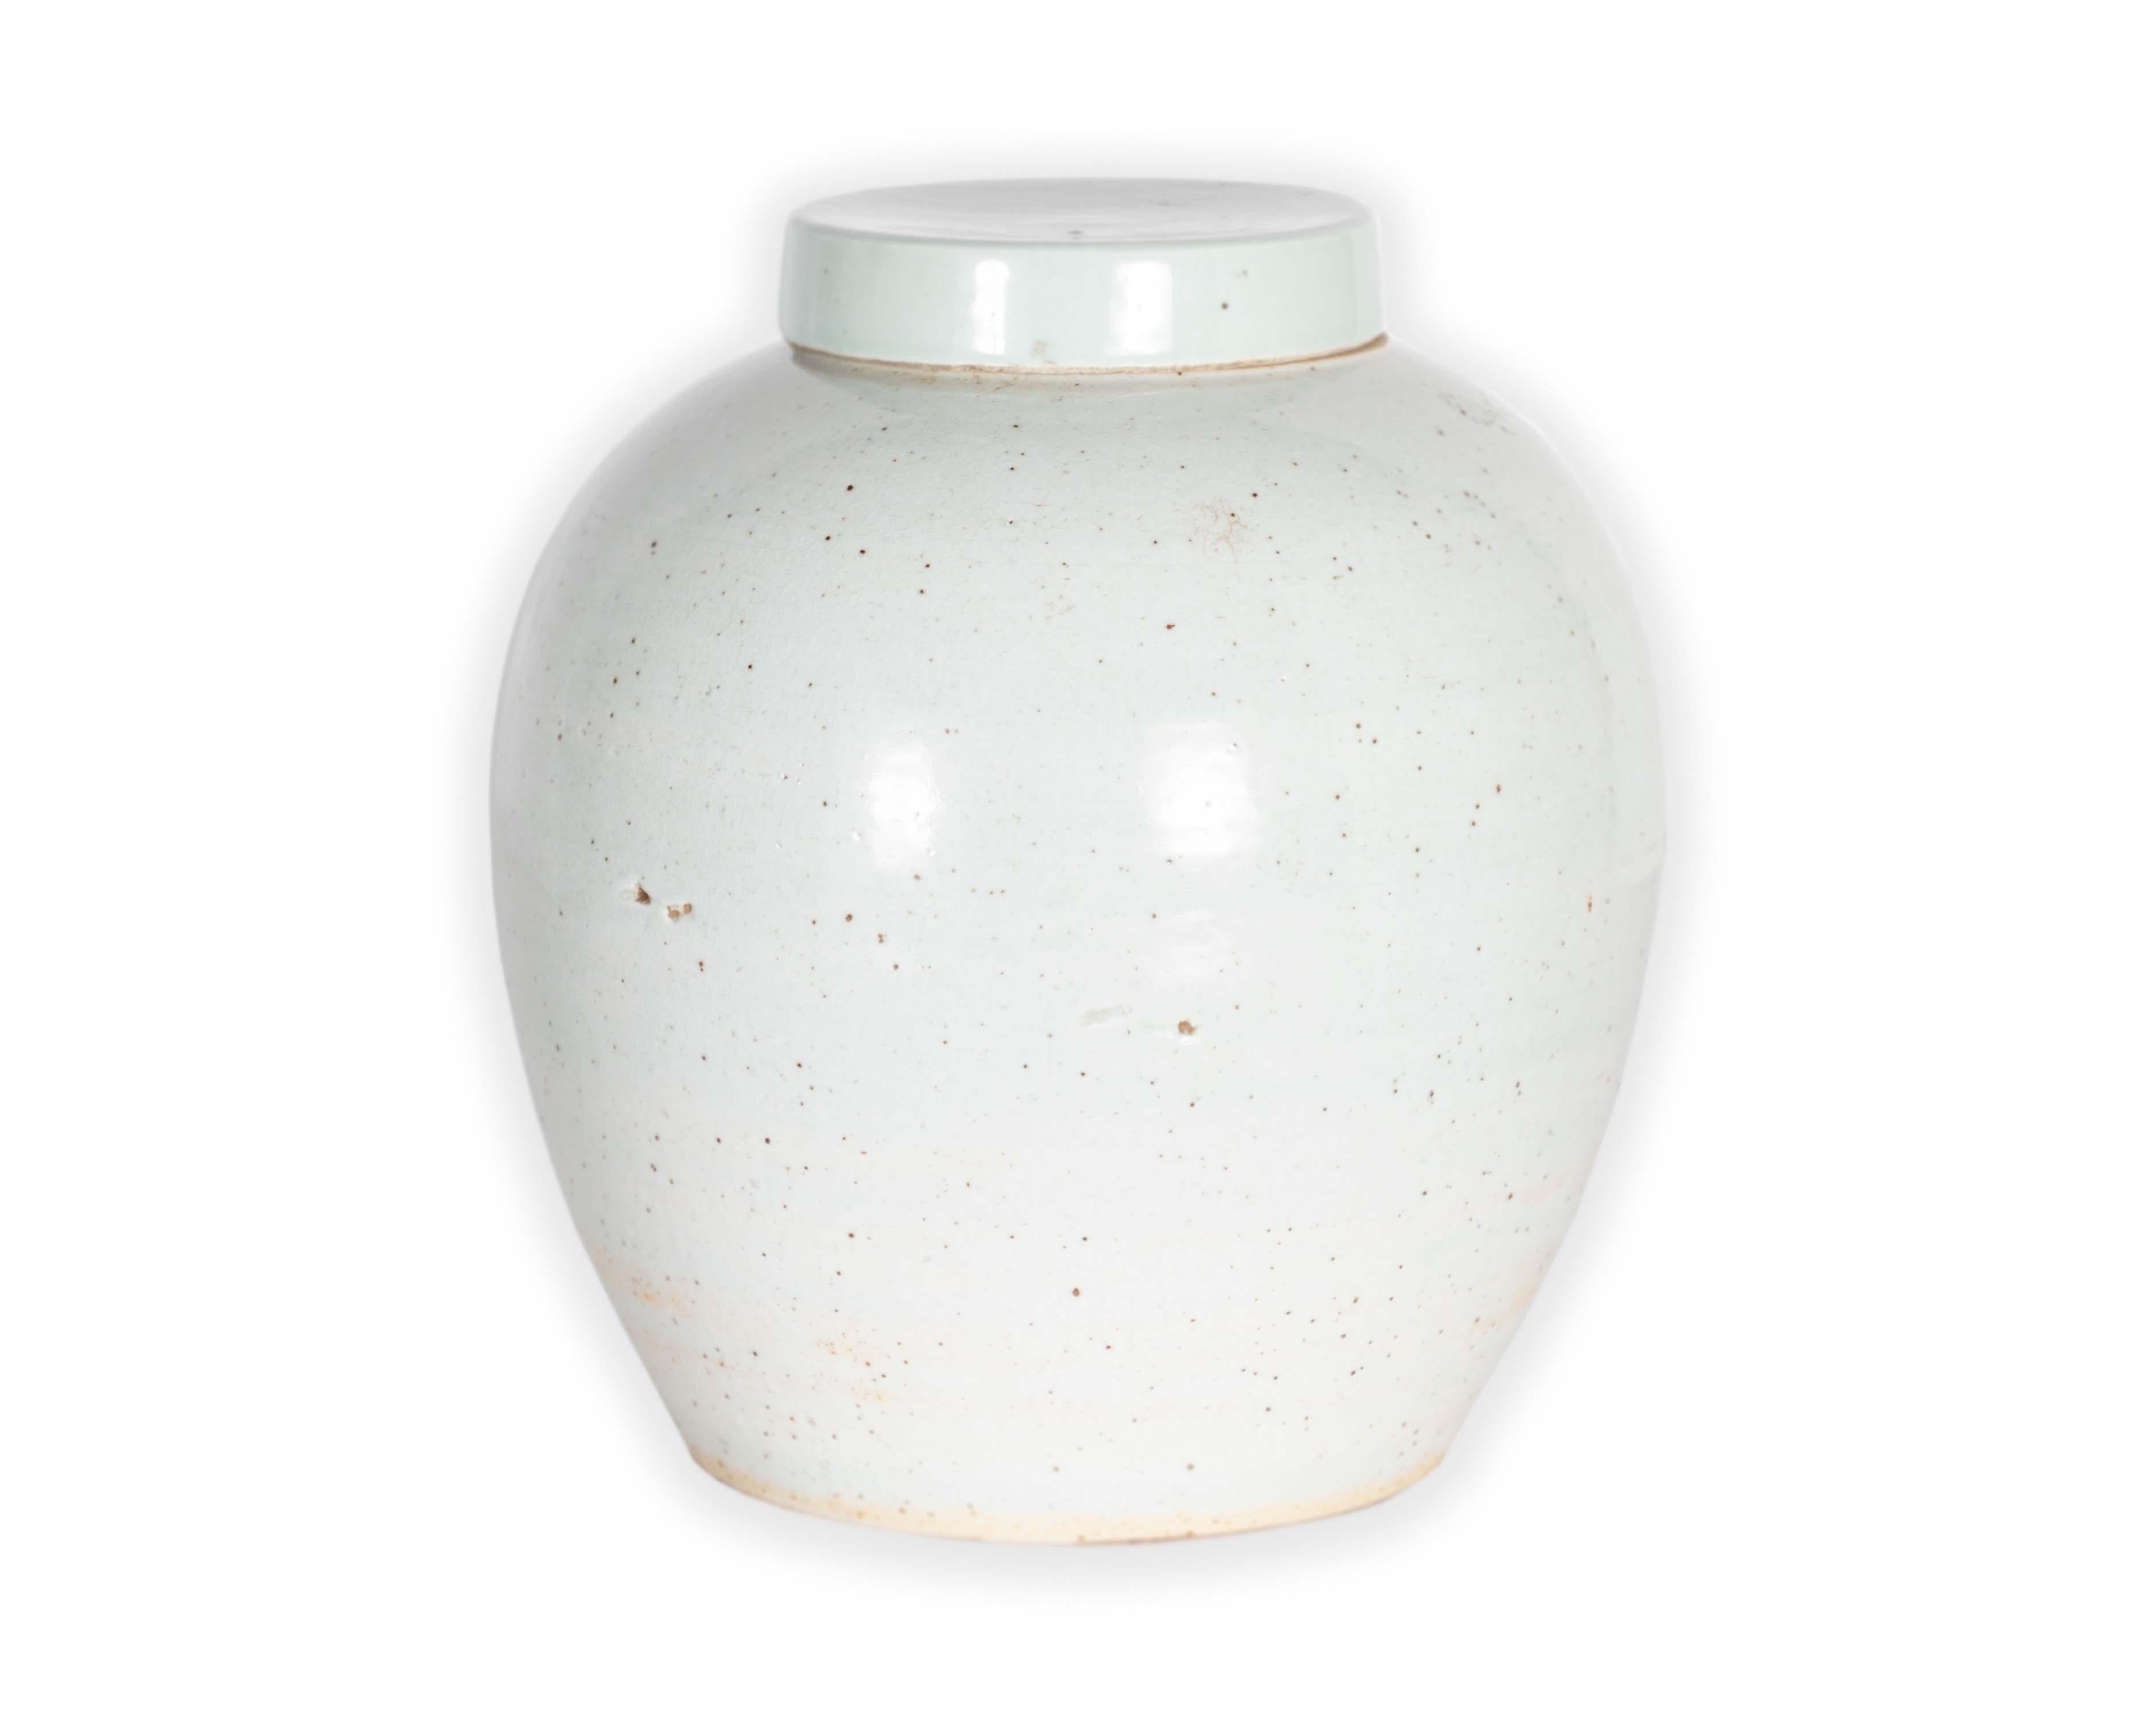 A delicate Chinese vase with a hint of color and crackle. The unique crackled glaze effect is achieved by heat-producing thermal expansion, in which minute cracks appear in the porcelain. Coated in a pale white finish that brings an air of levity to